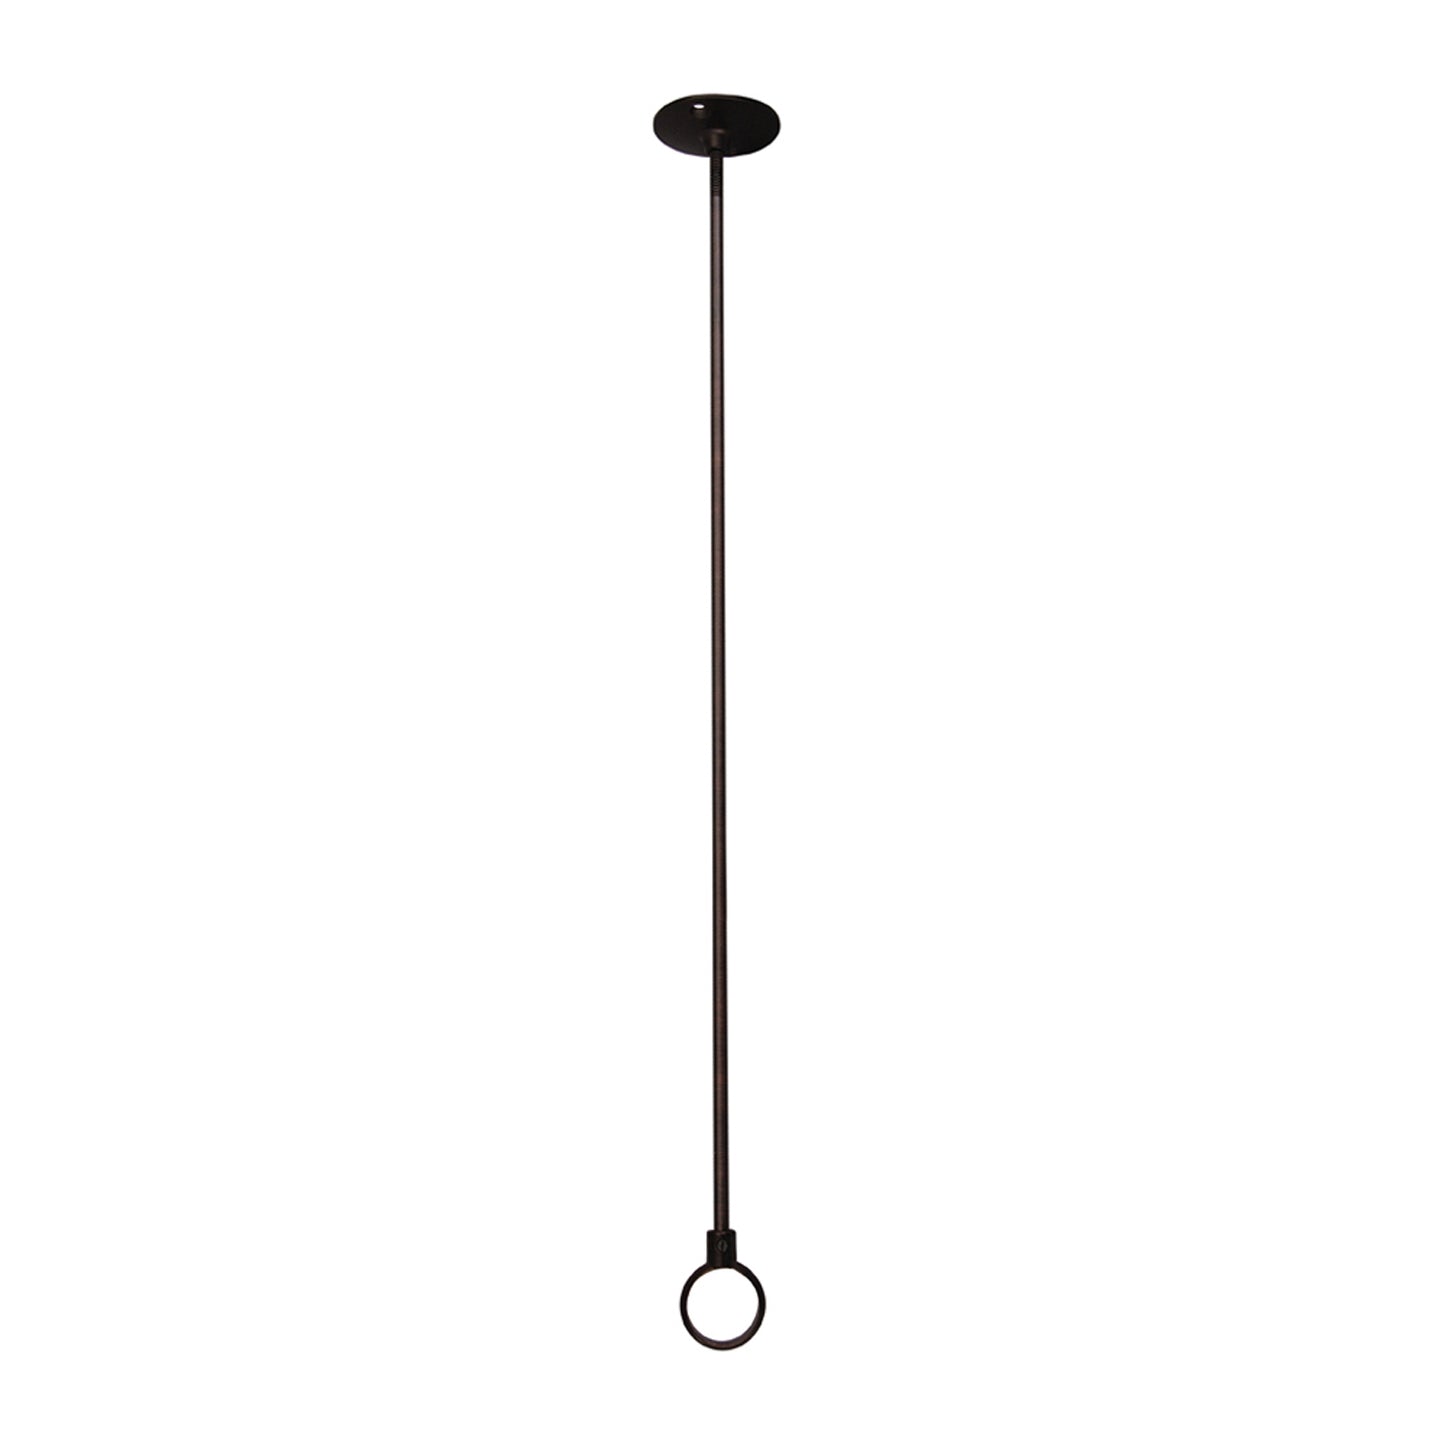 Ceiling Support 48" with Flange and EyeloopOil Rubbed Bronze